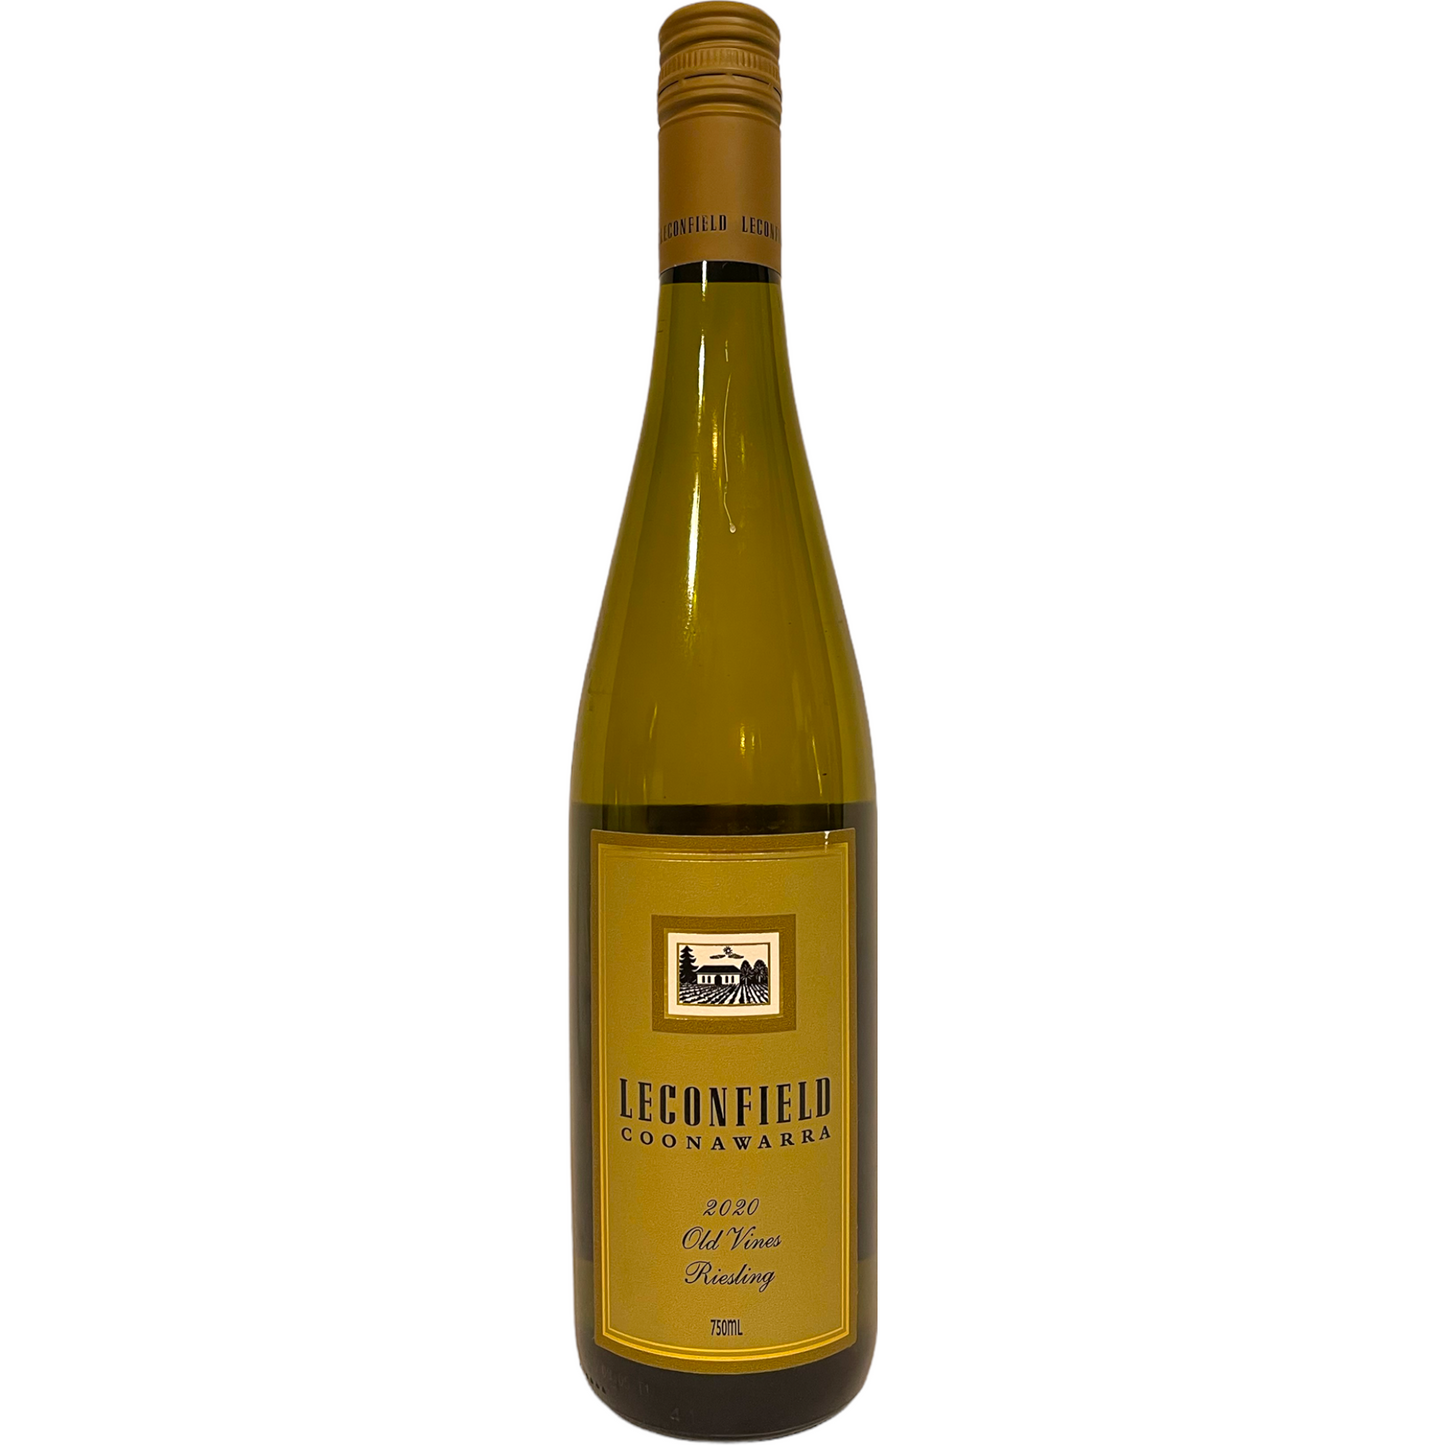 LECONFIELD RIESLING